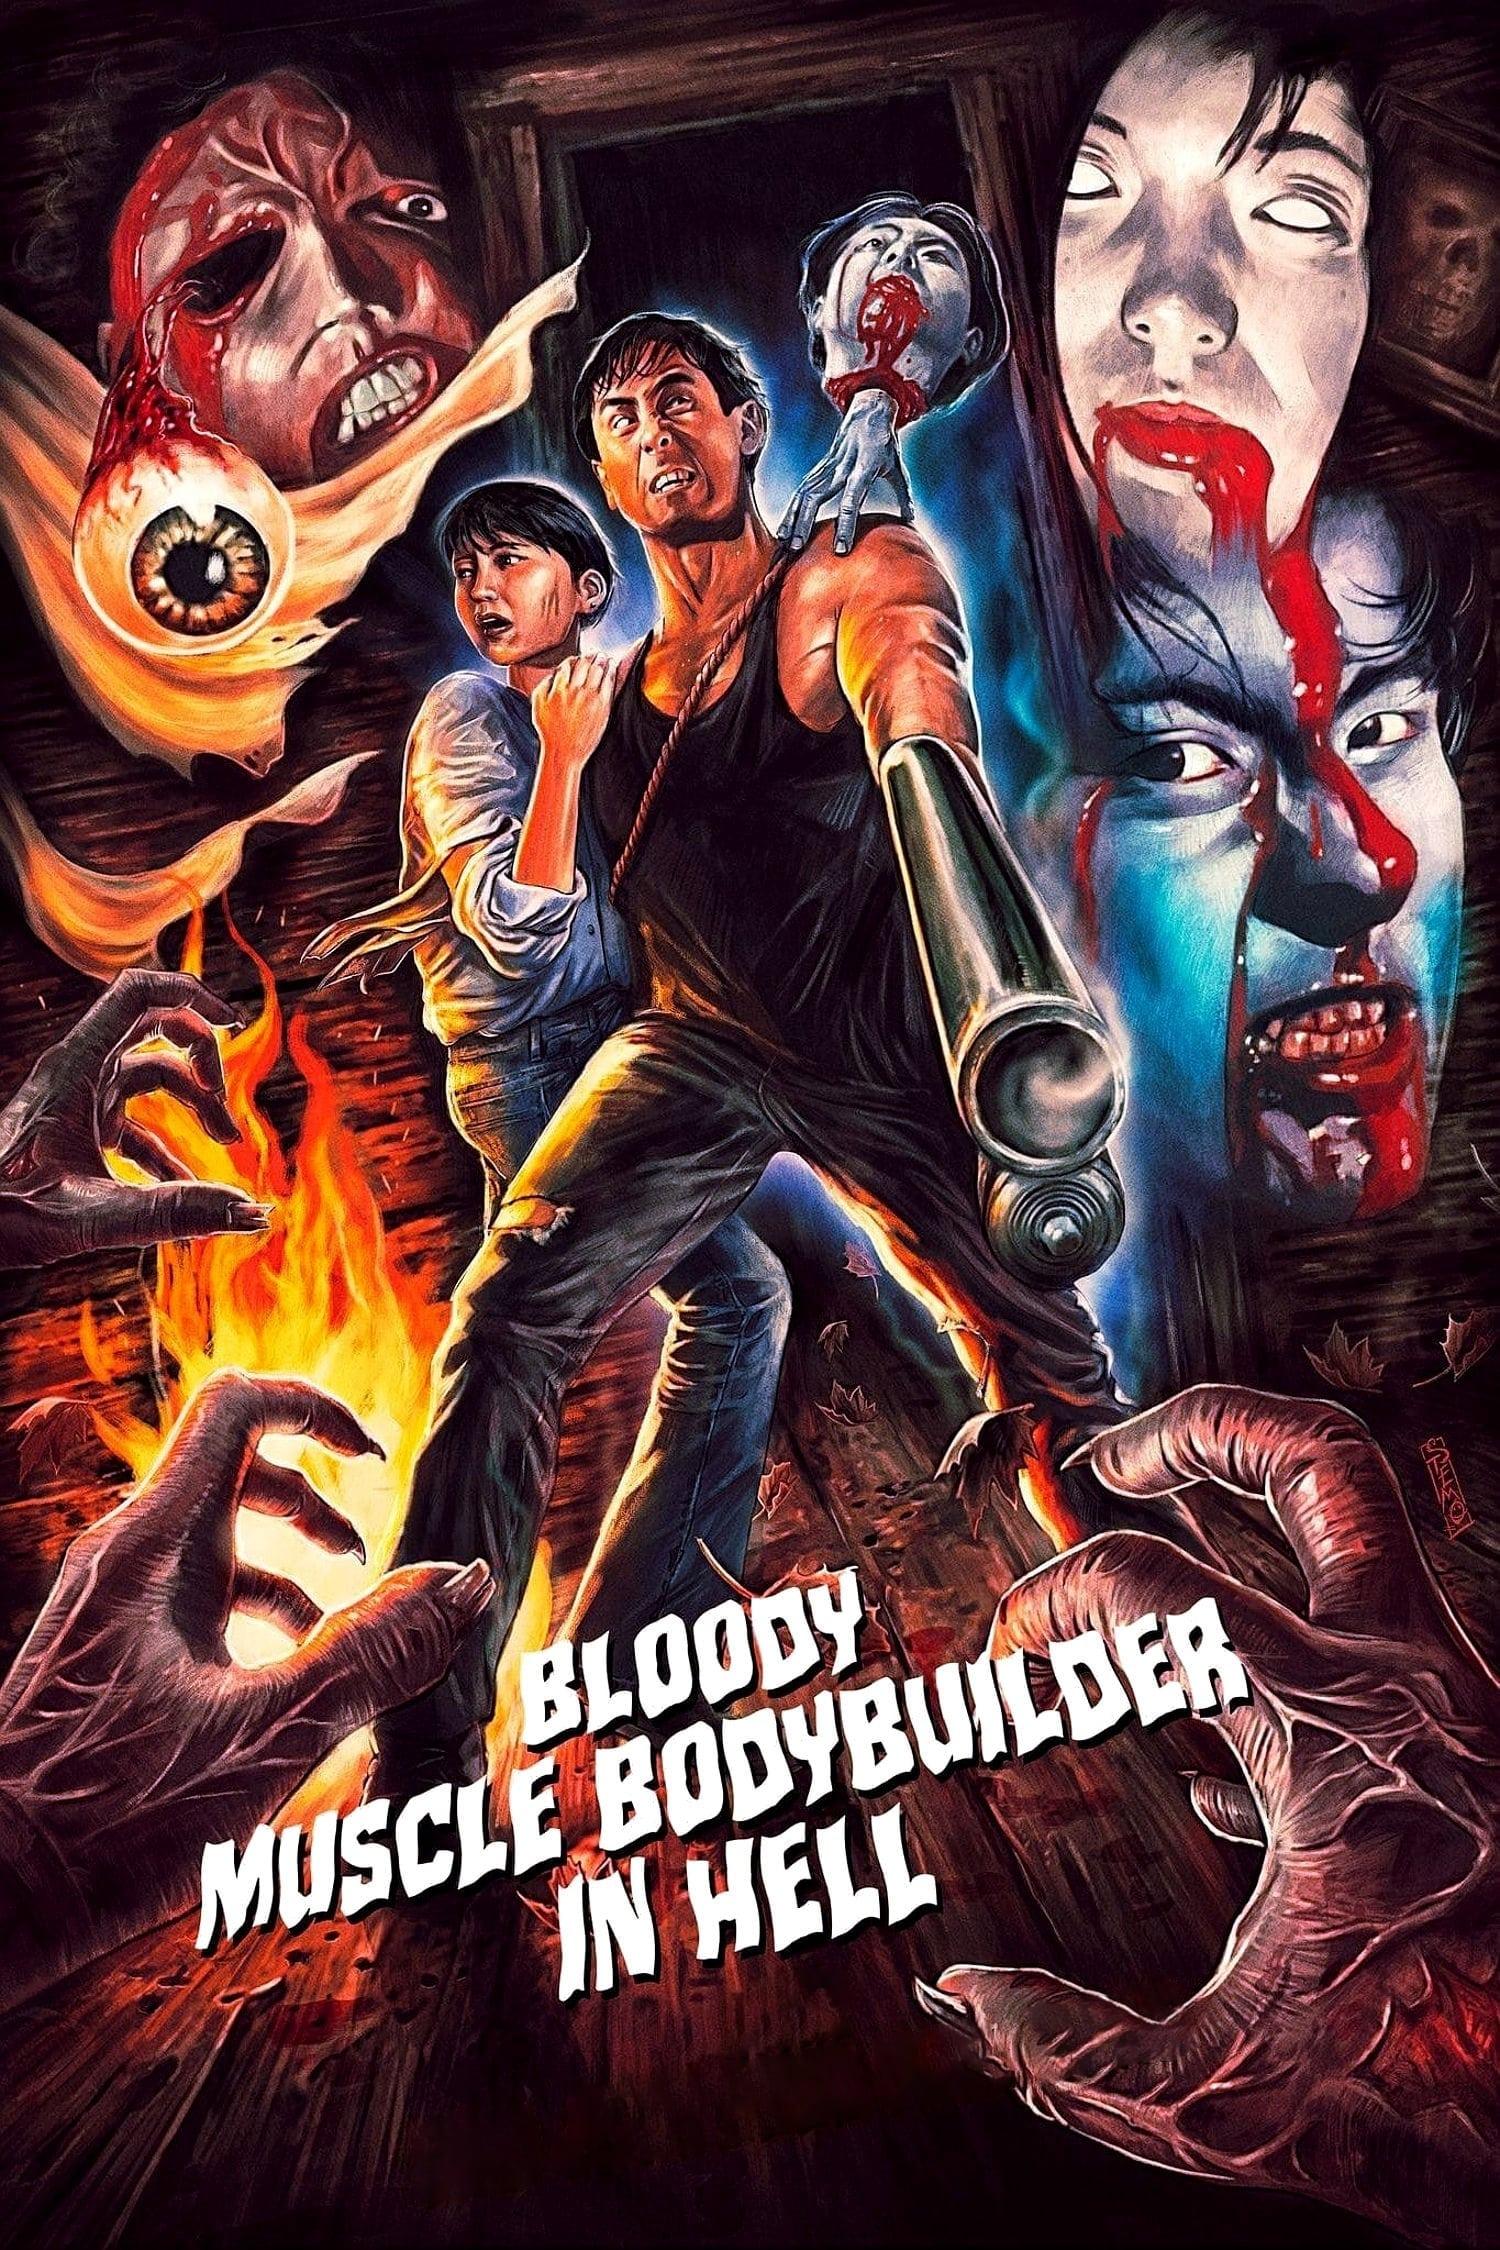 Bloody Muscle Body Builder in Hell poster